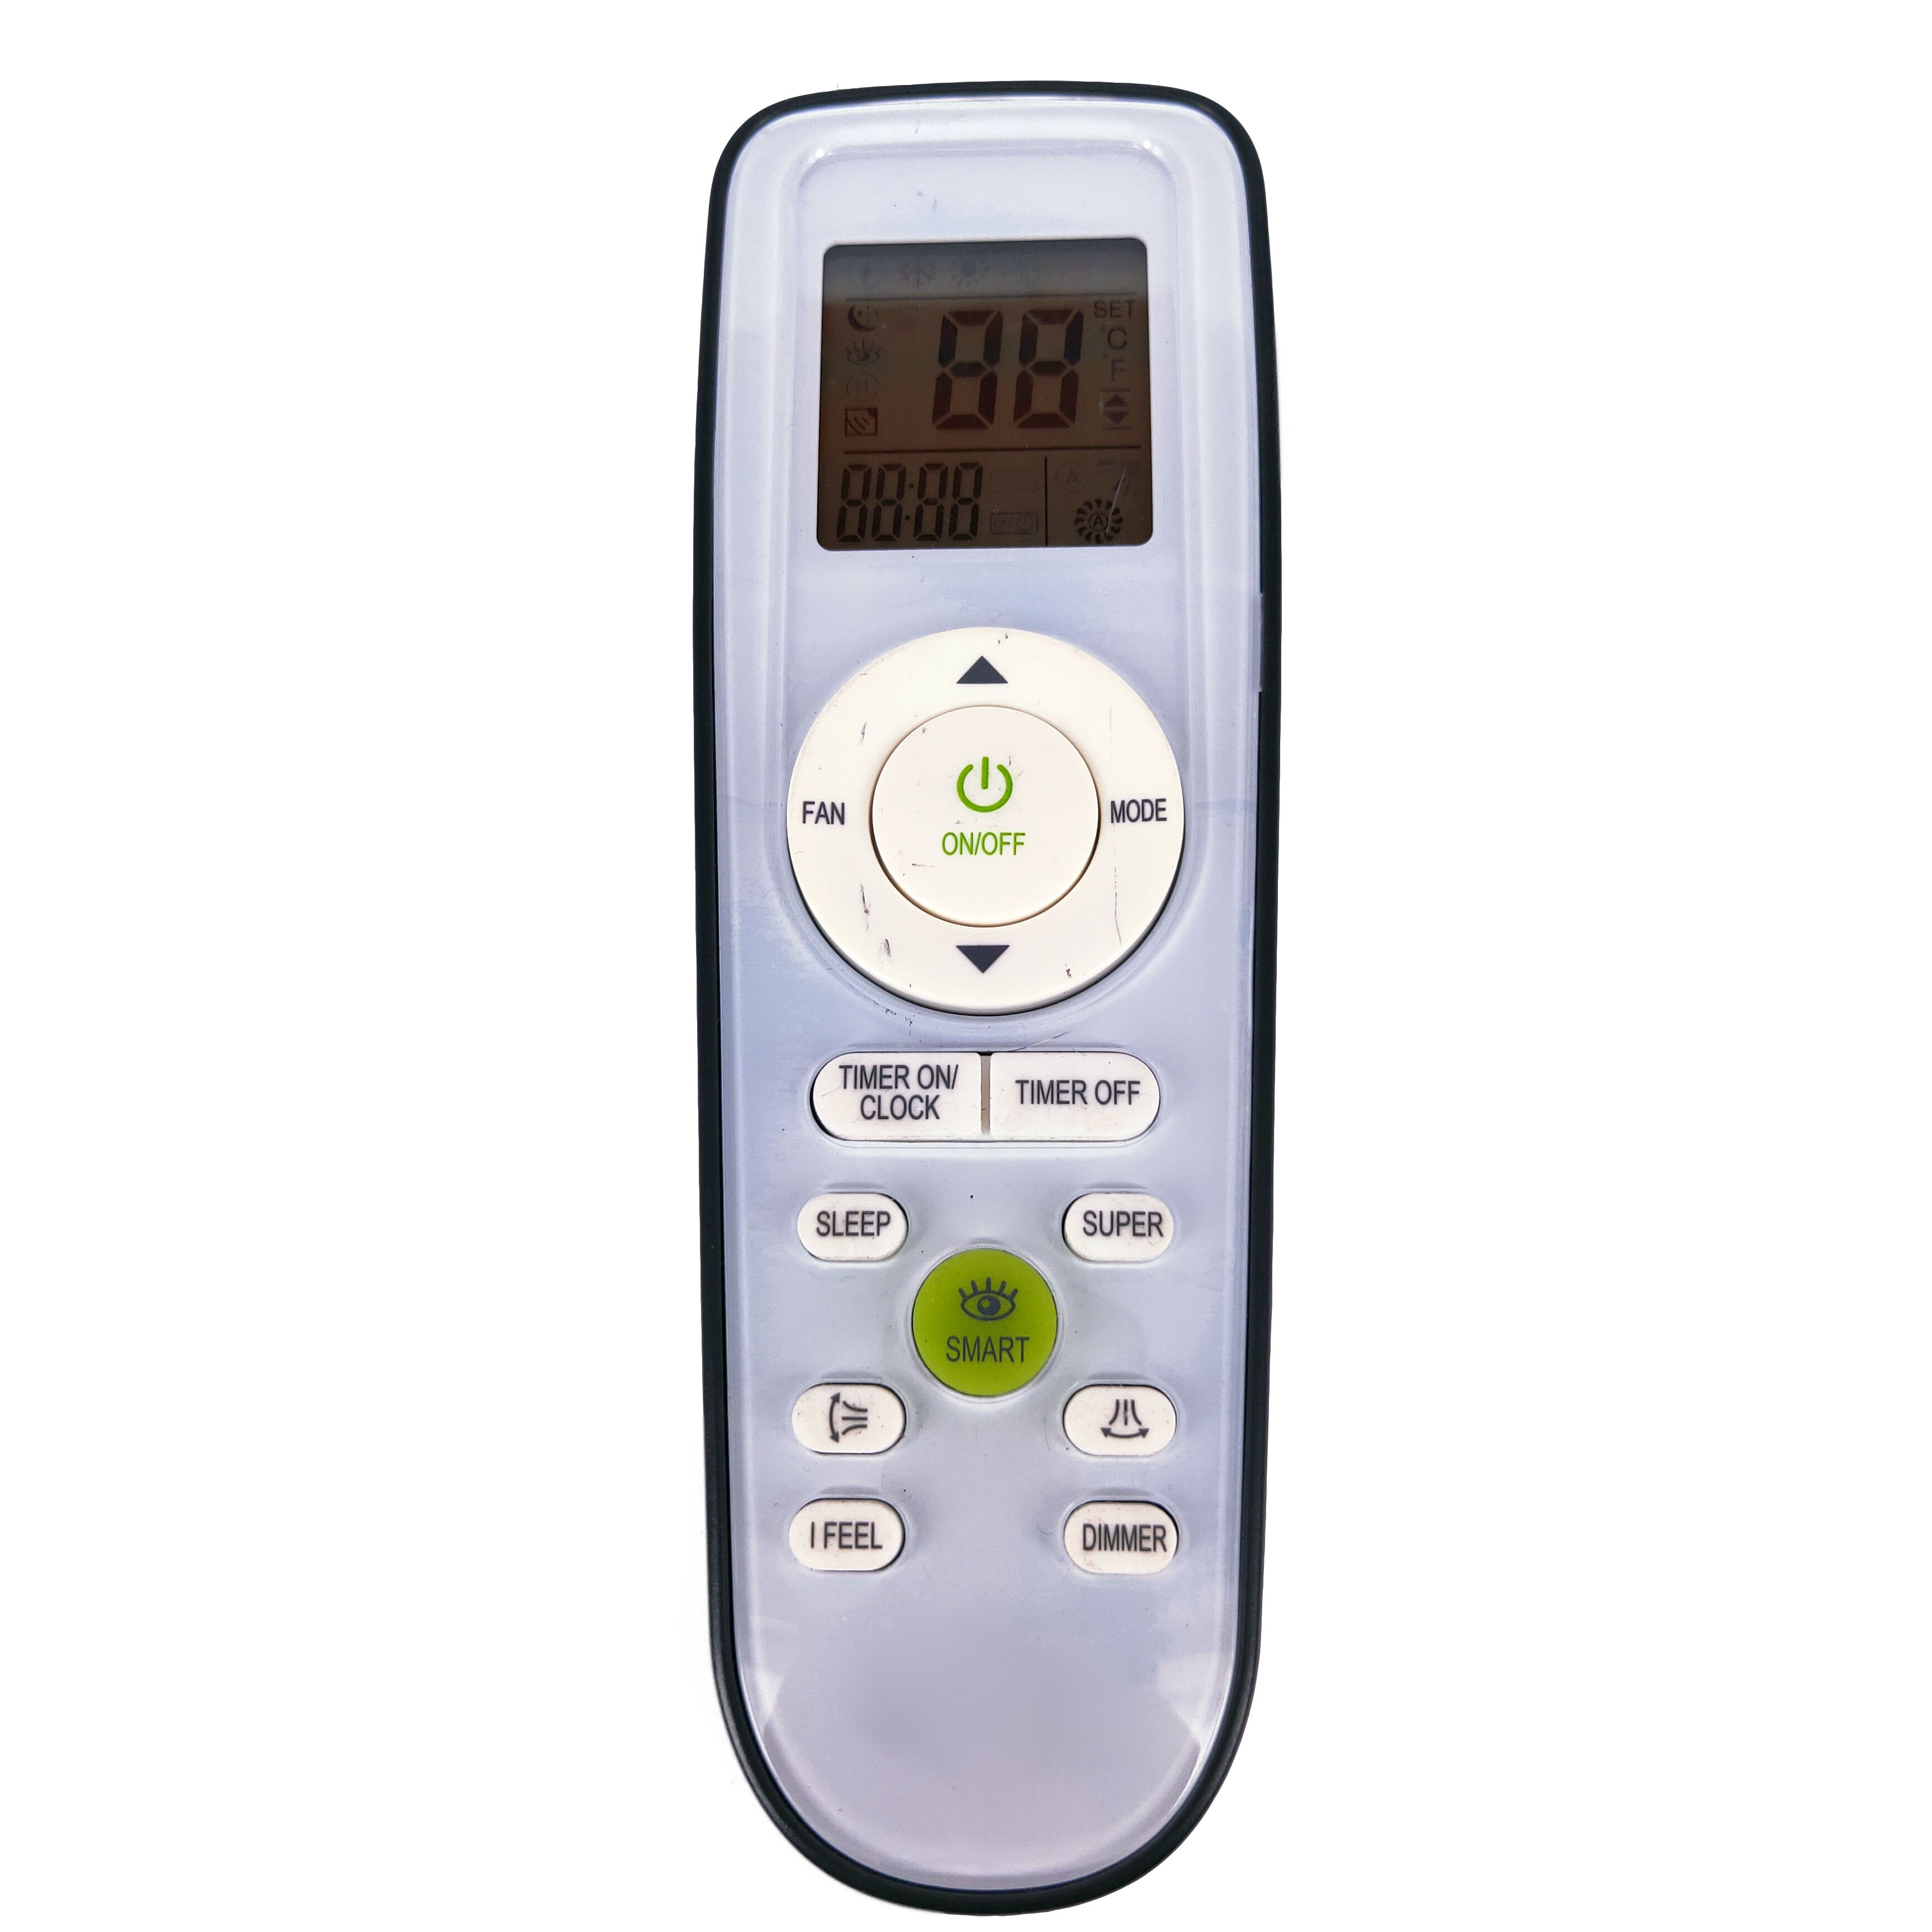 Replacement Remote for York Air Cons Model YRK - China Air Conditioner Remotes :: Cheapest AC Remote Solutions